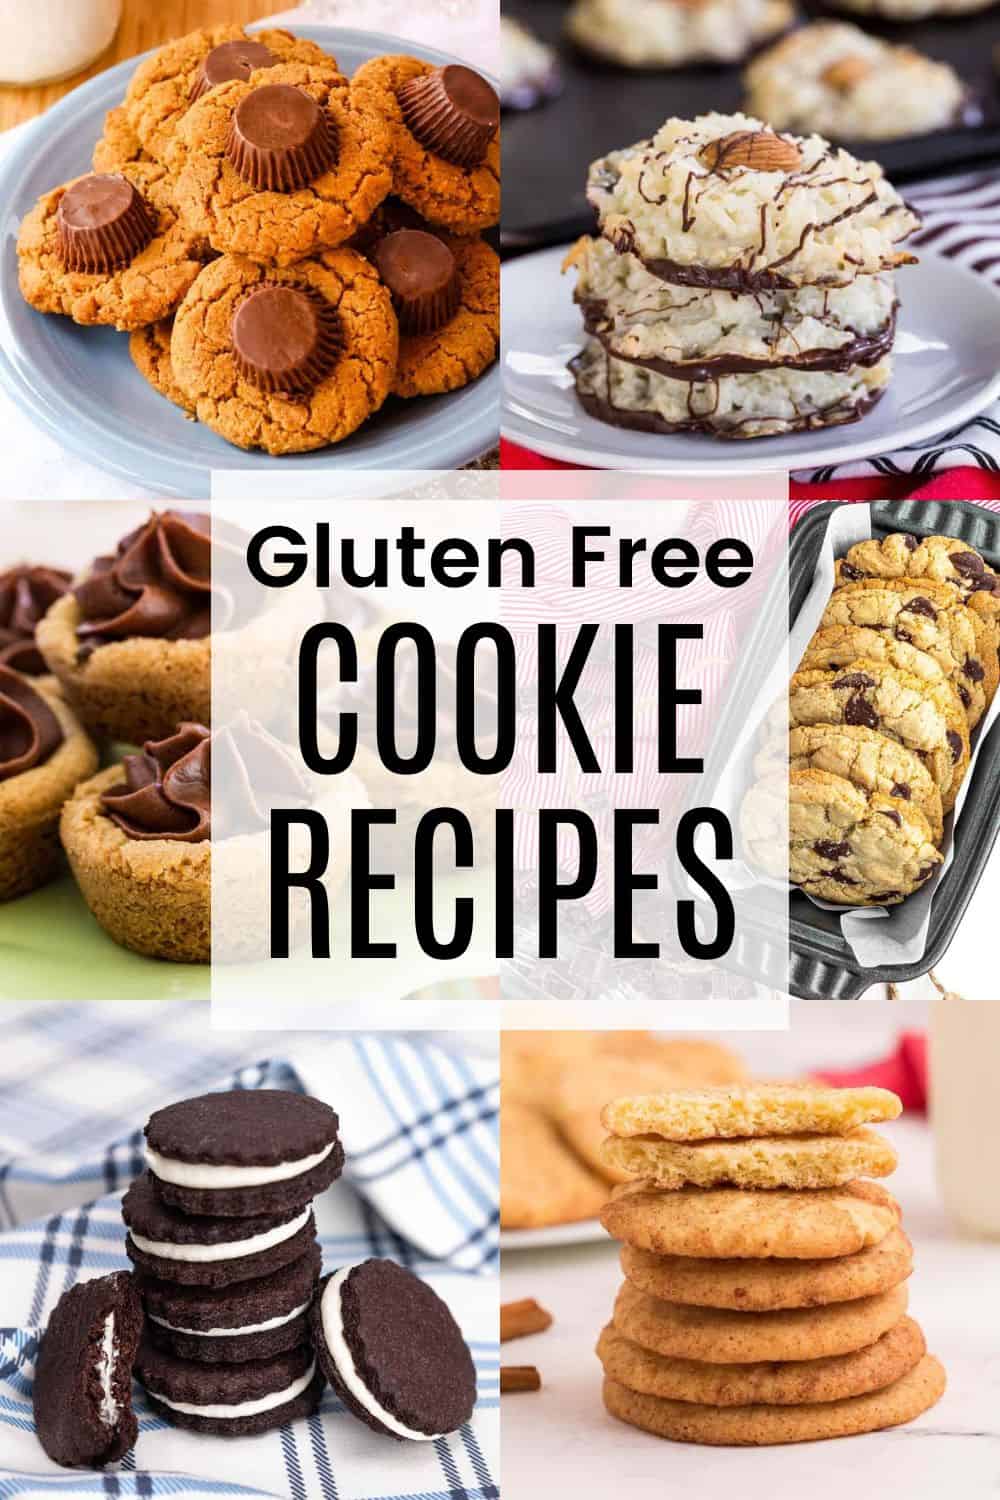 A two-by-three collage of different gluten free cookies including chocolate chip, snickerdoodles, and others, with a translucent white rectangle overlay with black text that says "Gluten Free Cookie Recipes".